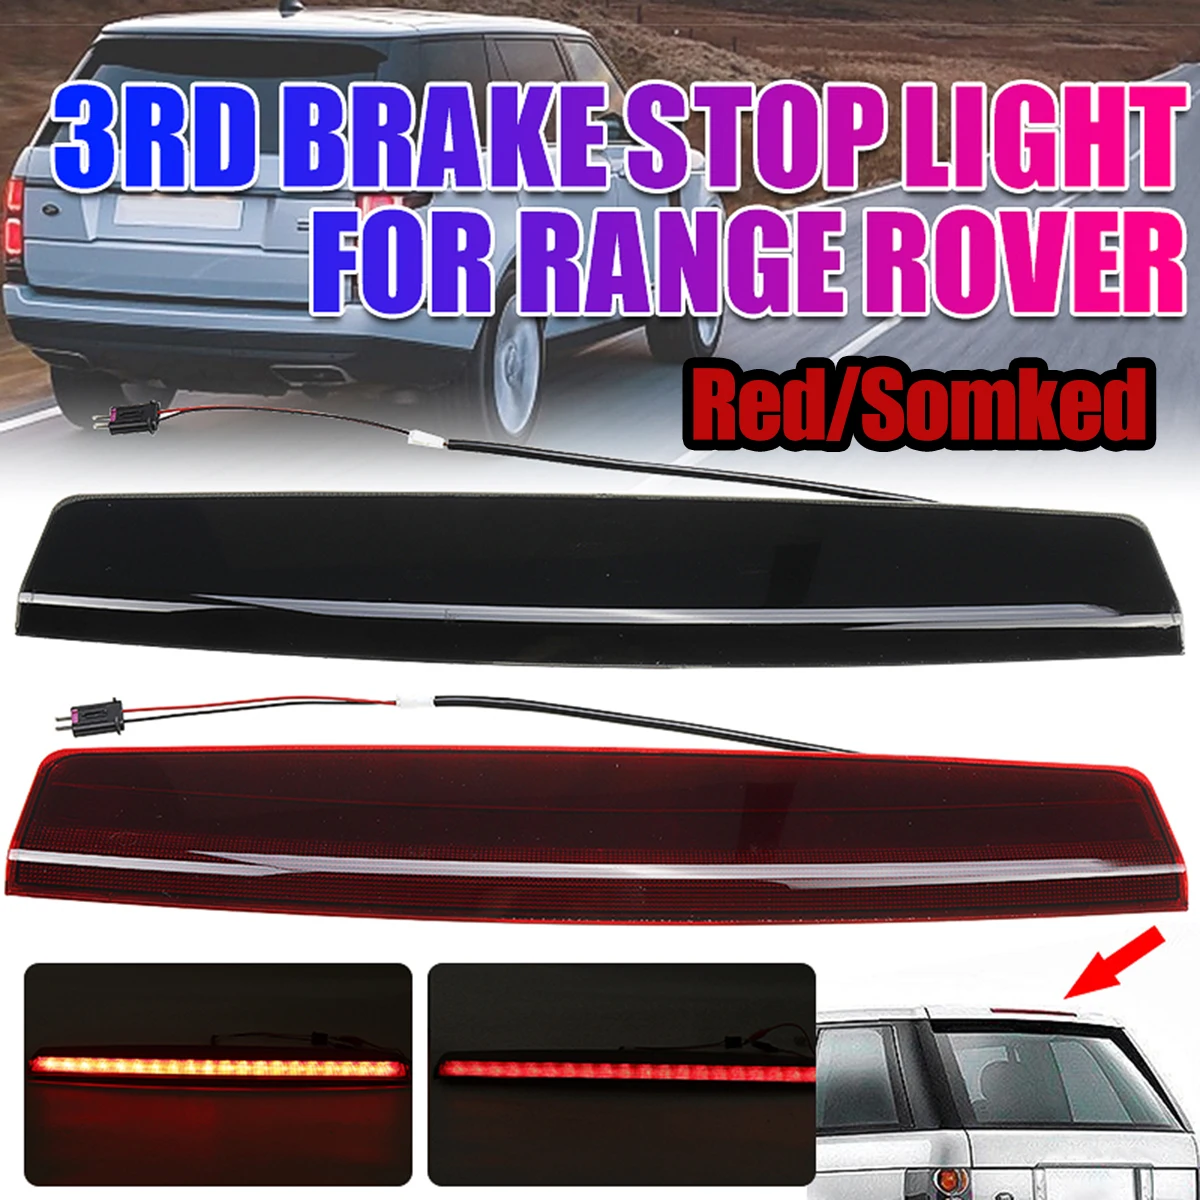 

Red/Smke LED Car High Mounted 3rd Third Brake Light Tail Light Stop Lamp XFG000040 For Range Rover L322 2004-2012 Rear Tail Lamp